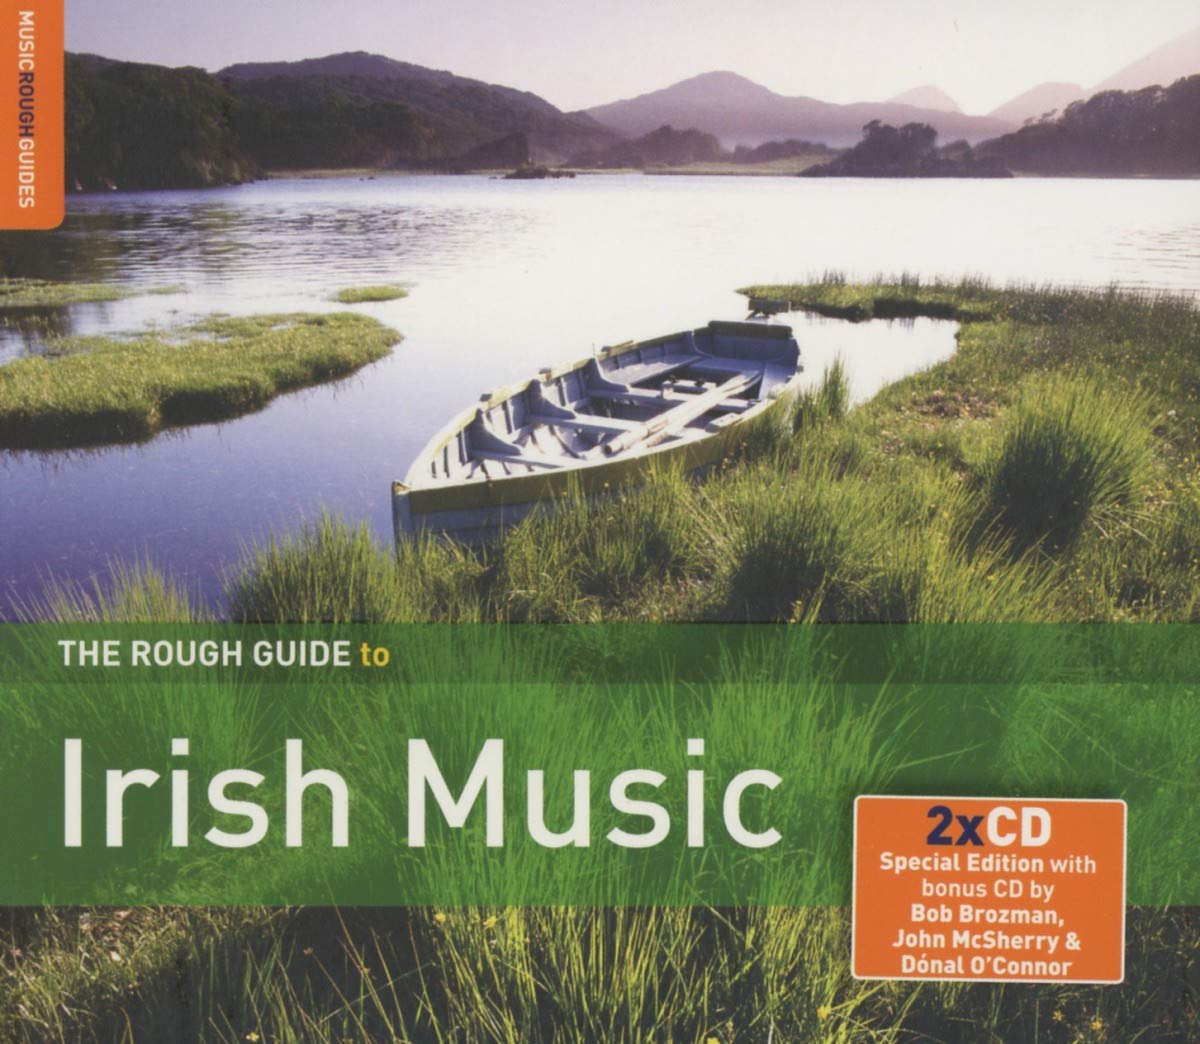 Image for "The Rough Guide to Irish Music"